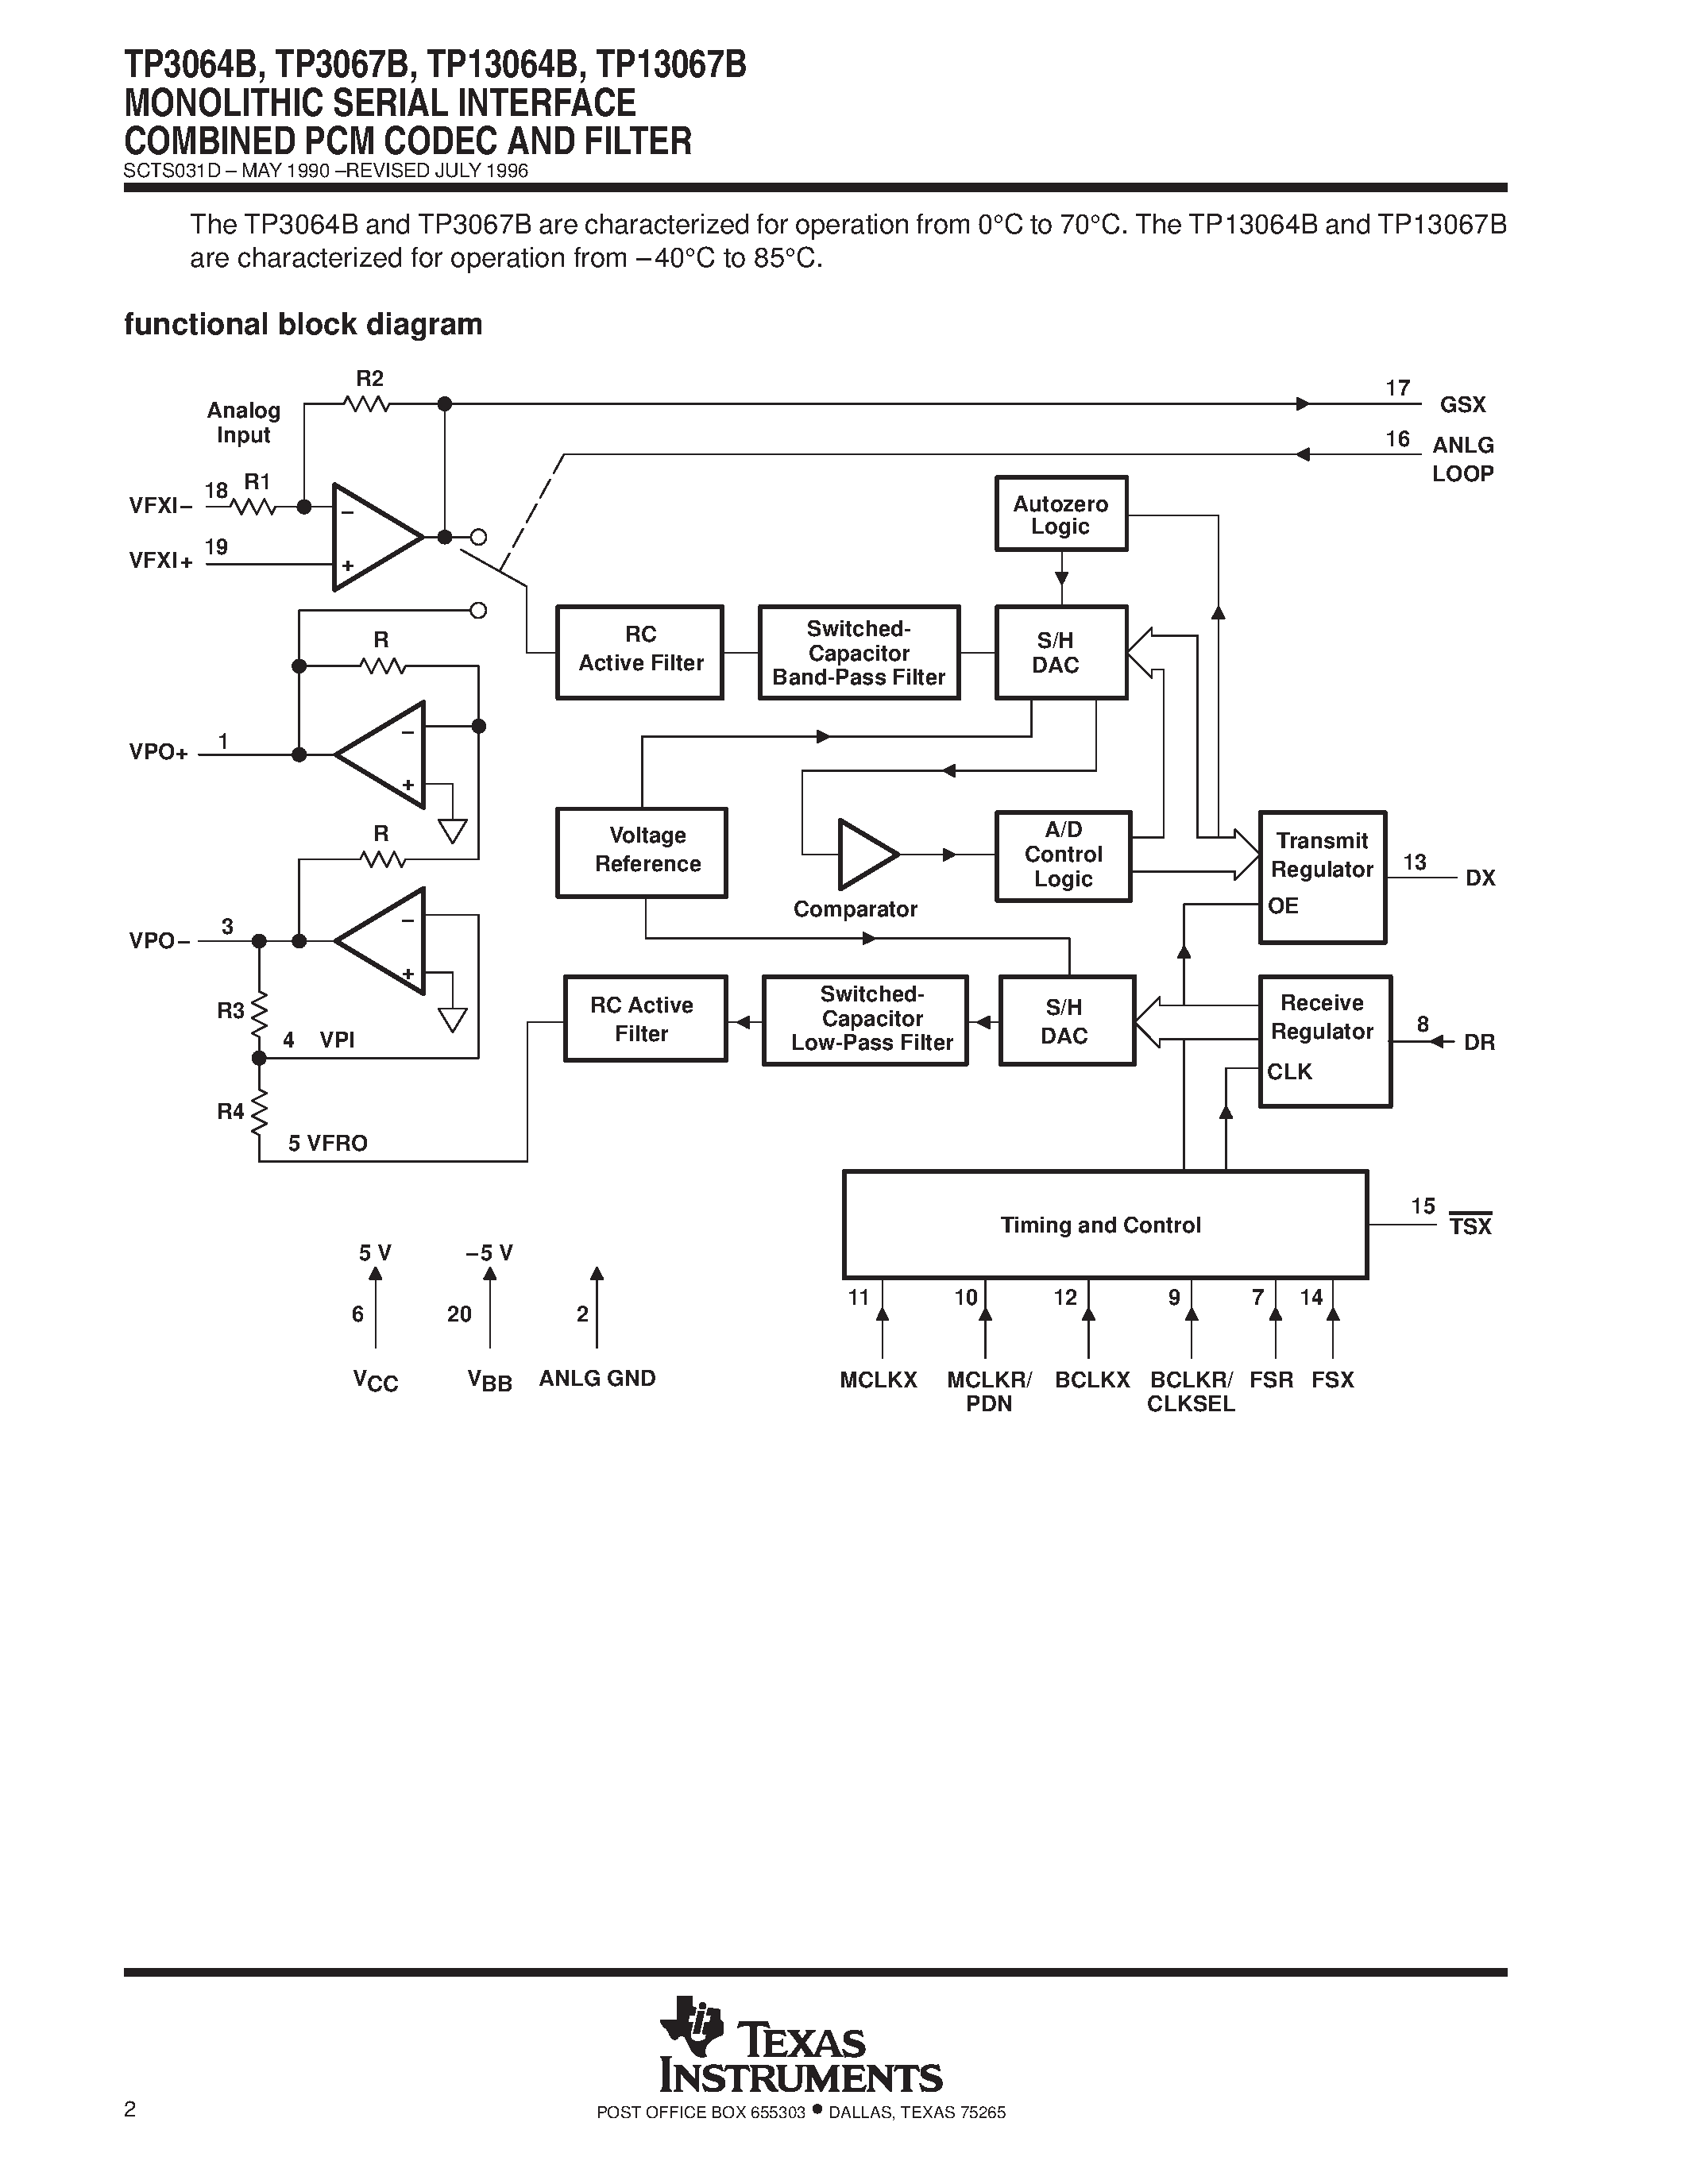 Datasheet TP13064B - MONOLITHIC SERIAL INTERFACE COMBINED PCM CODEC AND FILTER page 2